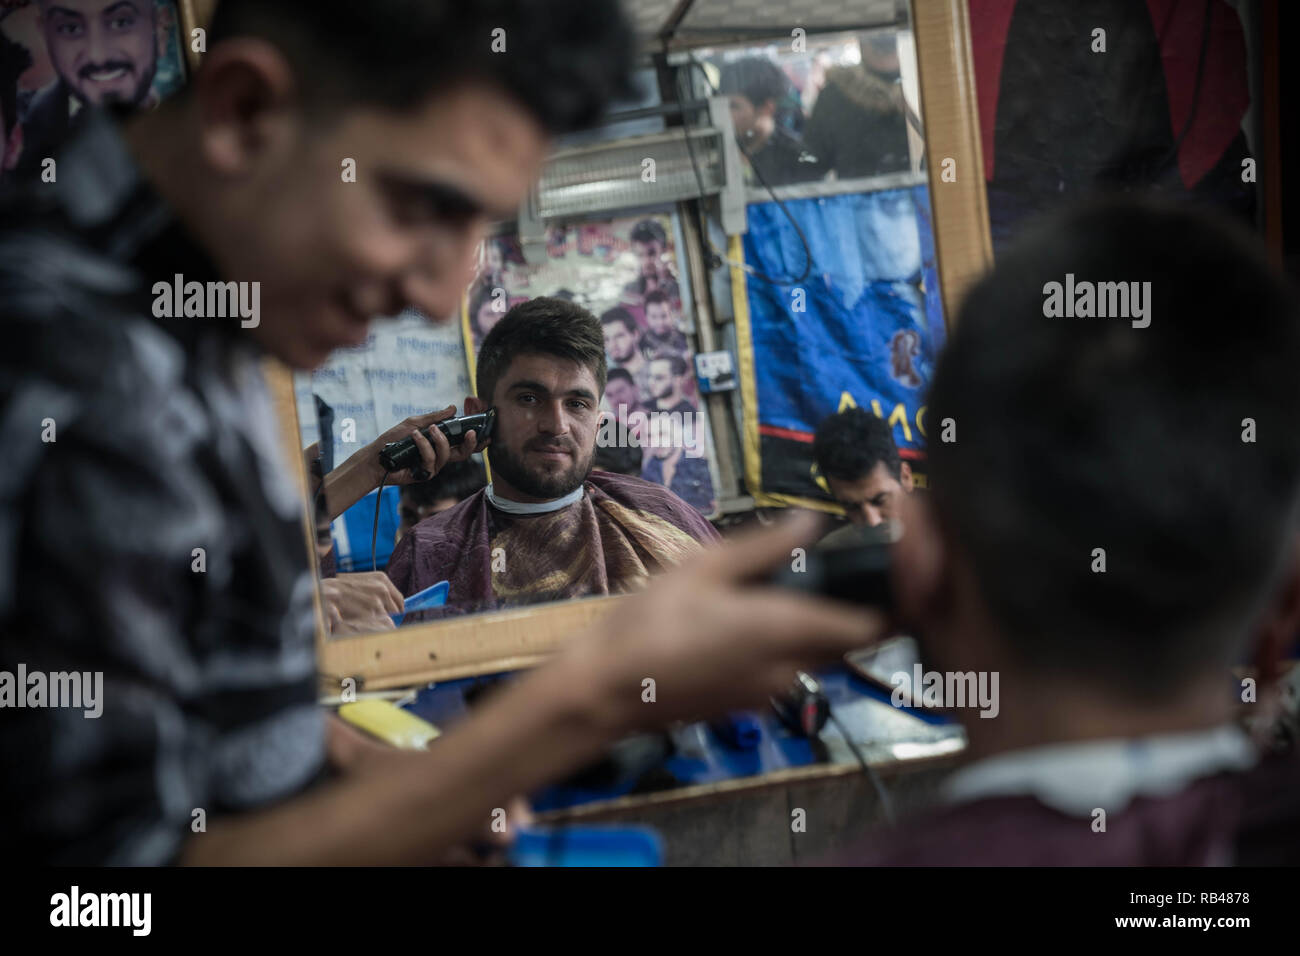 Zakho, Duhok Governorate, Iraq. 29th Dec, 2018. A Yazidi barber cutting hair for another Yazidi man at the market of the Bajed Kandala Camp.The Bajed Kandala IDP camp is hosting over 9000 Yazidi Internally Displaced Persons from Sinjar where they lost their homes to the ISIS militants in August 2014. Credit: Geovien So/SOPA Images/ZUMA Wire/Alamy Live News Stock Photo